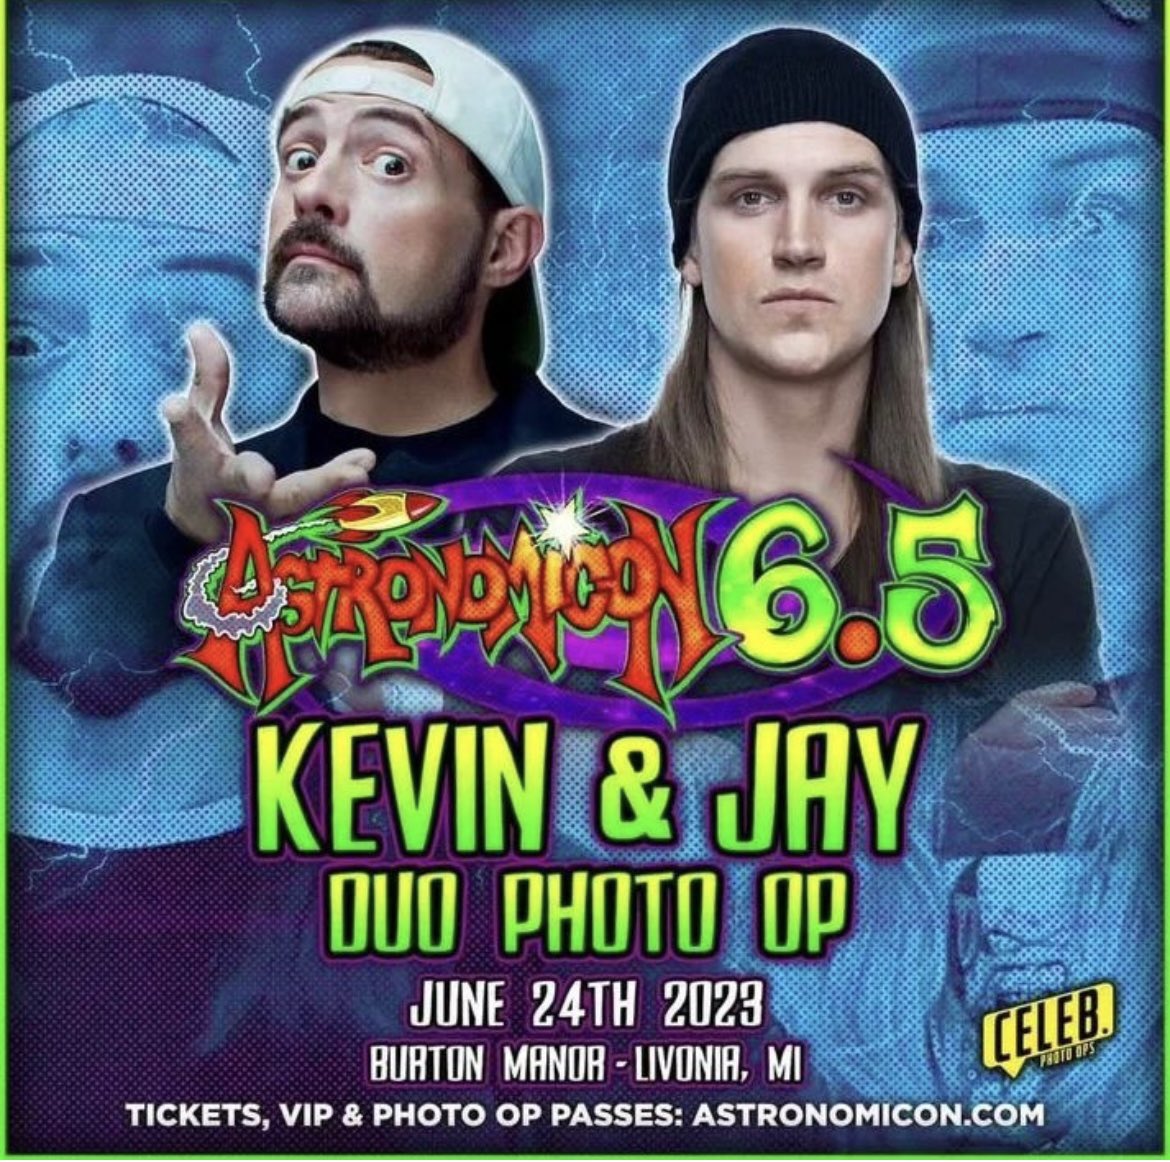 Jay and Silent Bob photo ops are available @AstronomiconMI 🚀
Astronomicon.com
Not long now, it’s going down June 24th at Burton Manor in Livonia, Michigan‼️
#jayandsilentbob #viewaskew #jasonmewes #kevinsmith